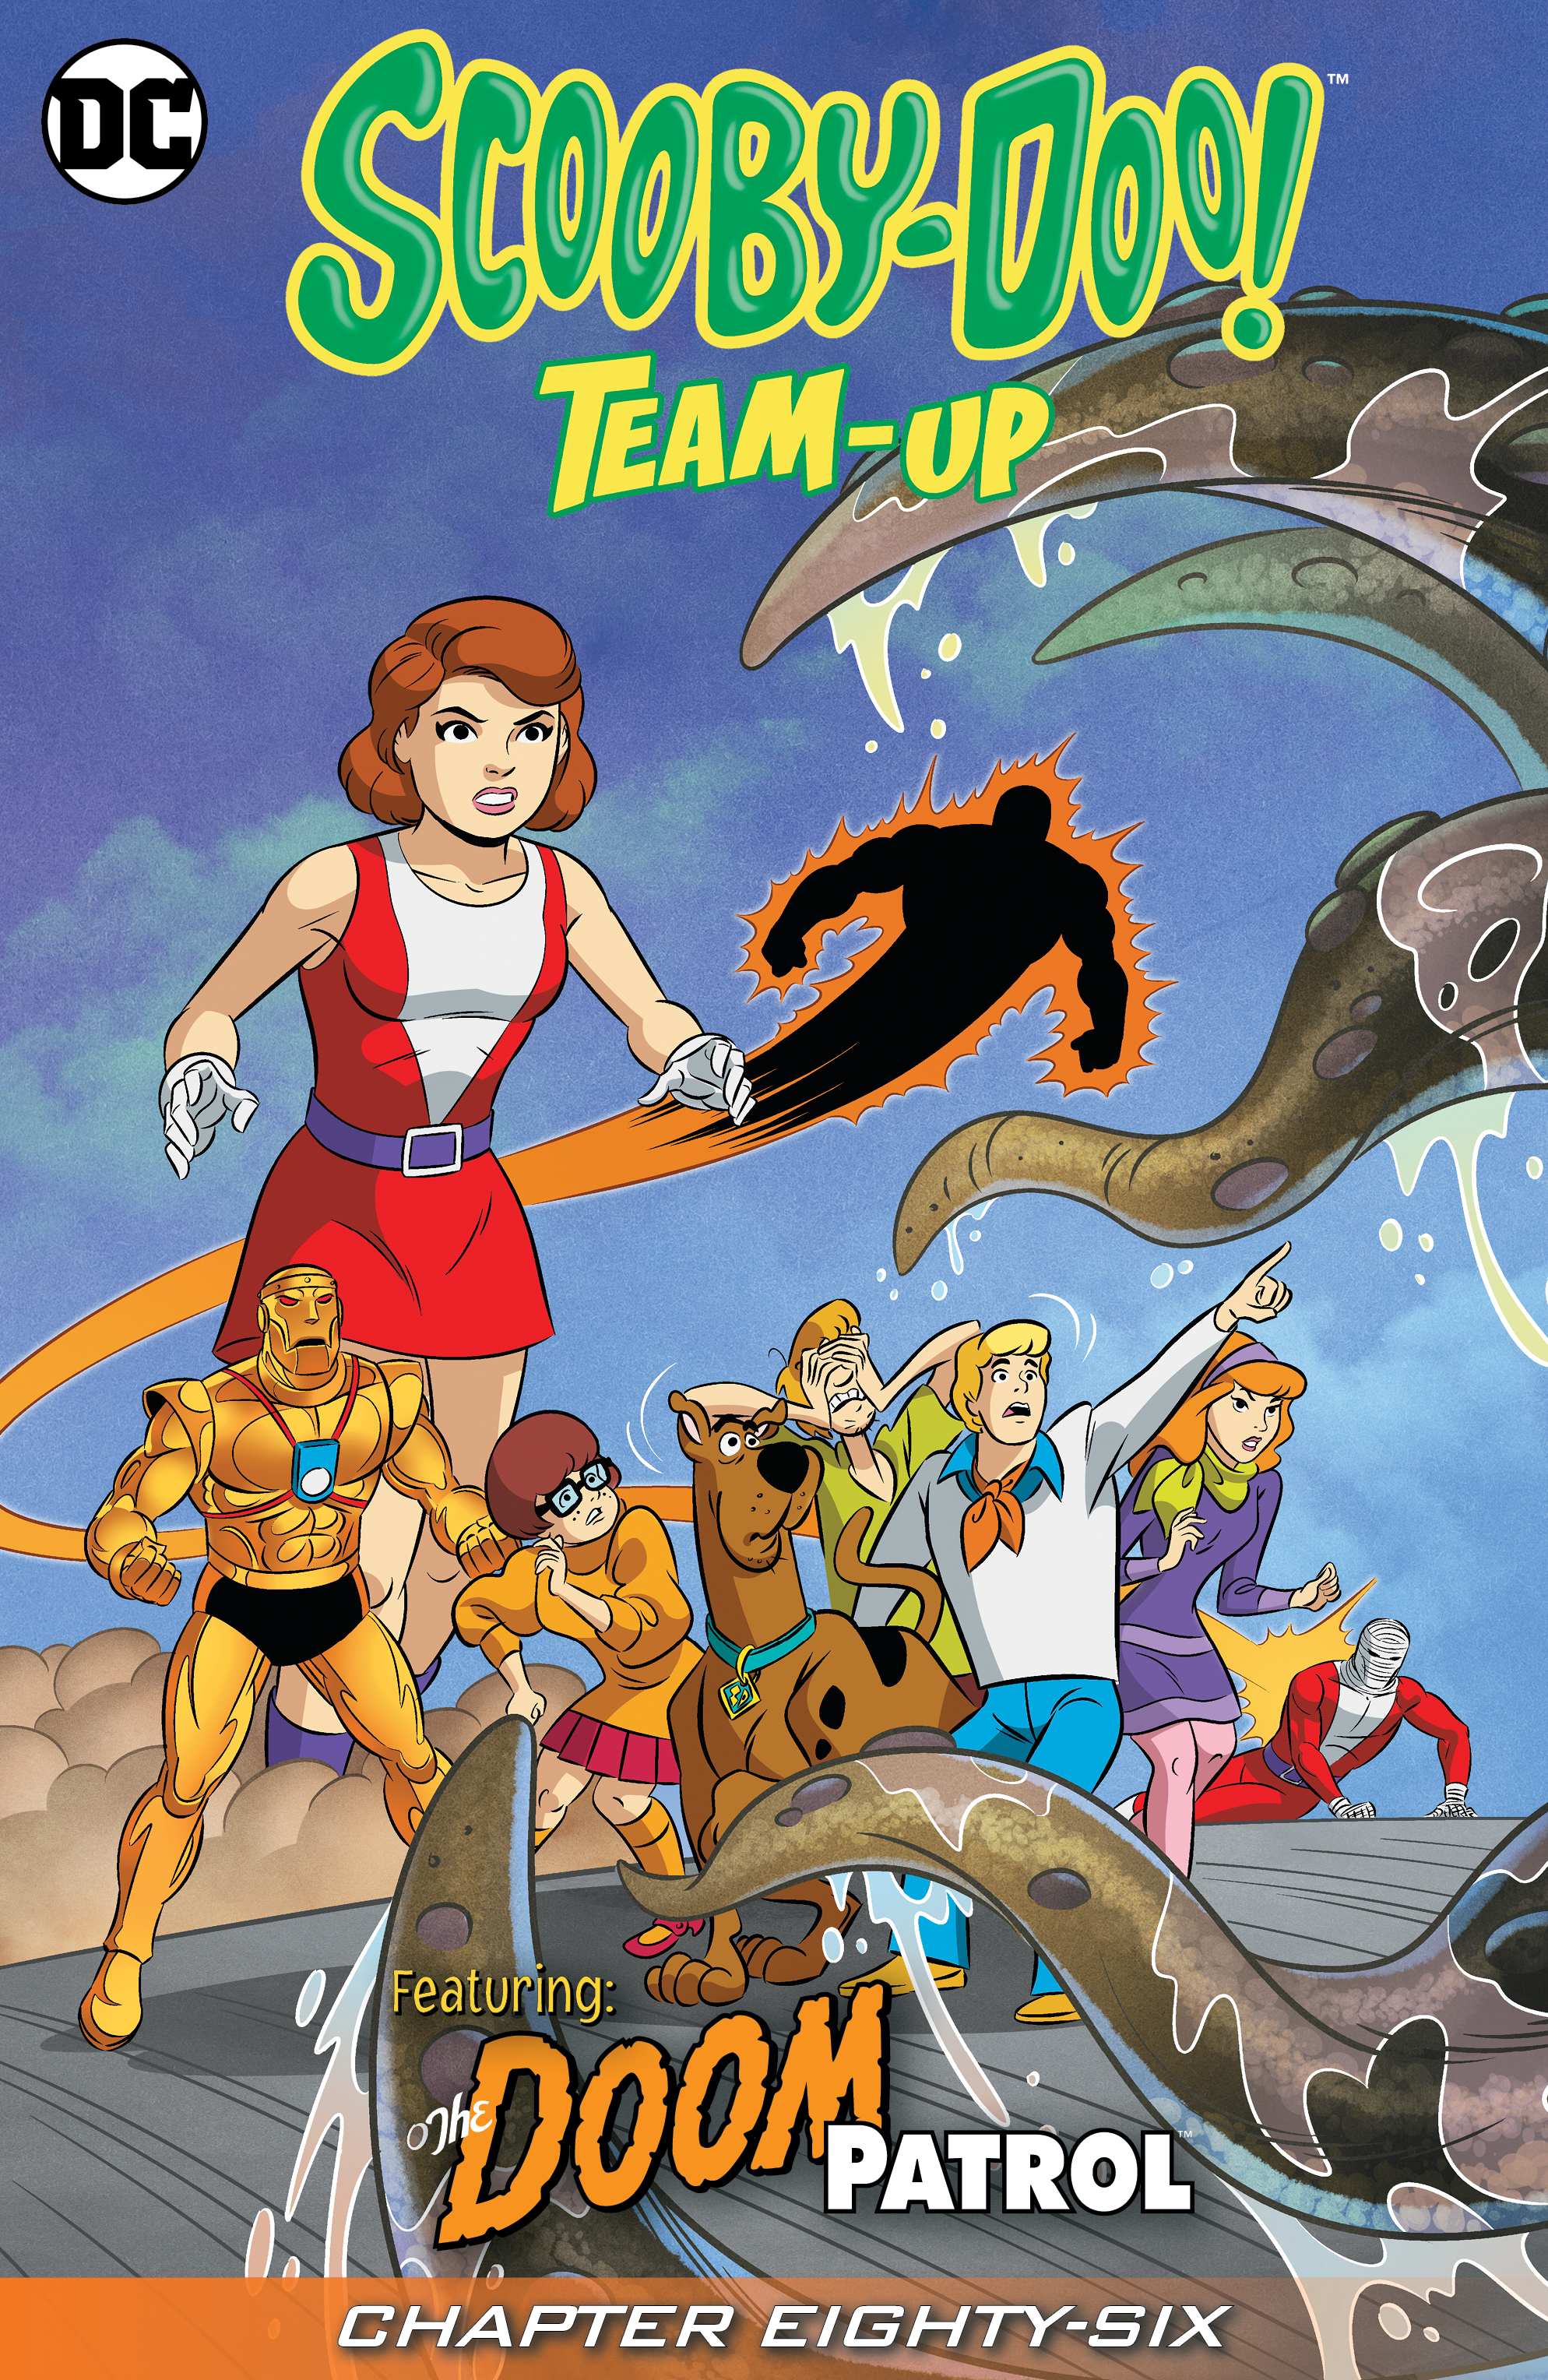 Scooby-Doo Team-Up #86 preview images